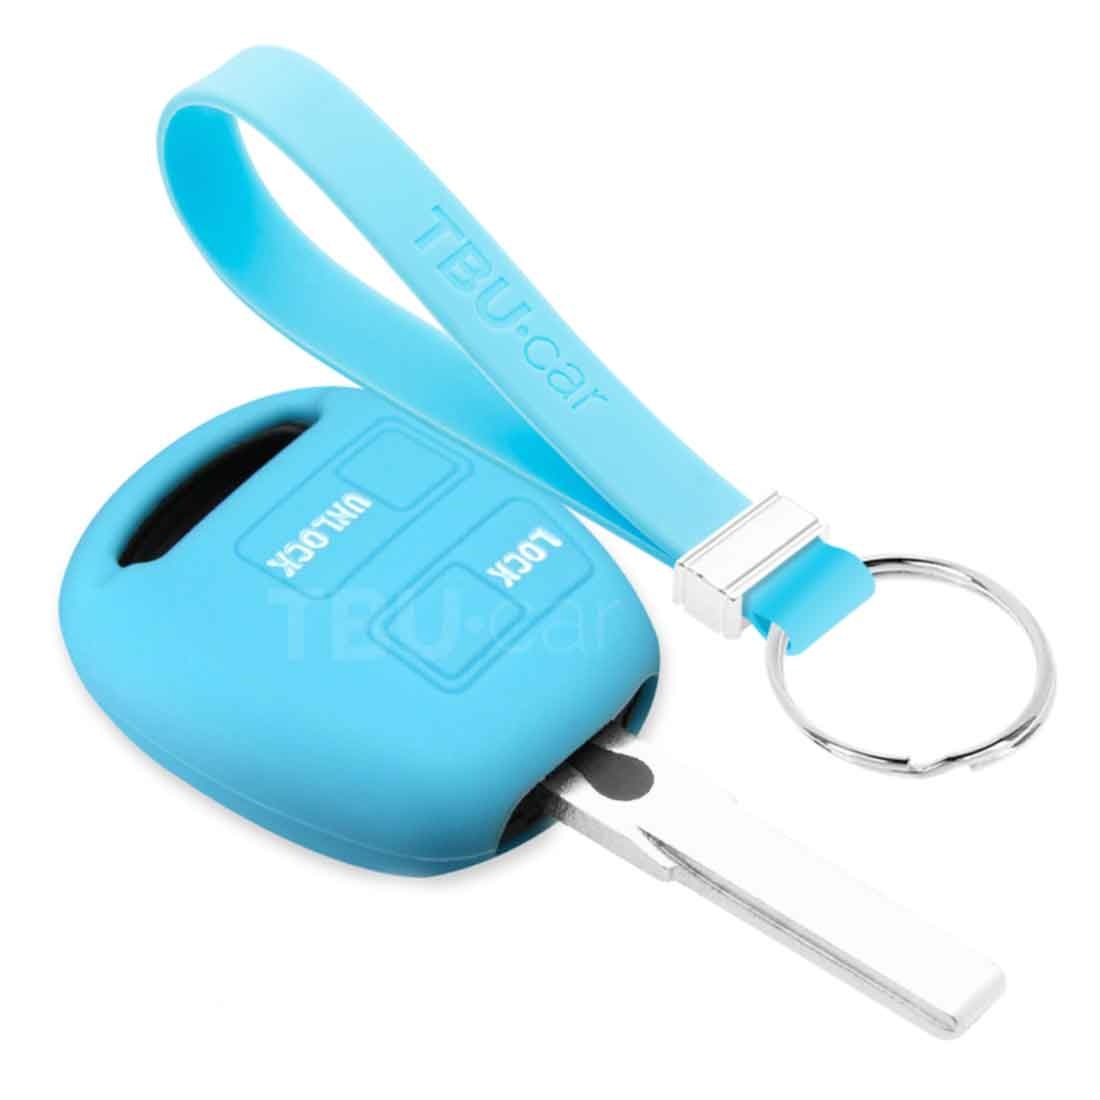 TBU car TBU car Car key cover compatible with Toyota - Silicone Protective Remote Key Shell - FOB Case Cover - Light Blue